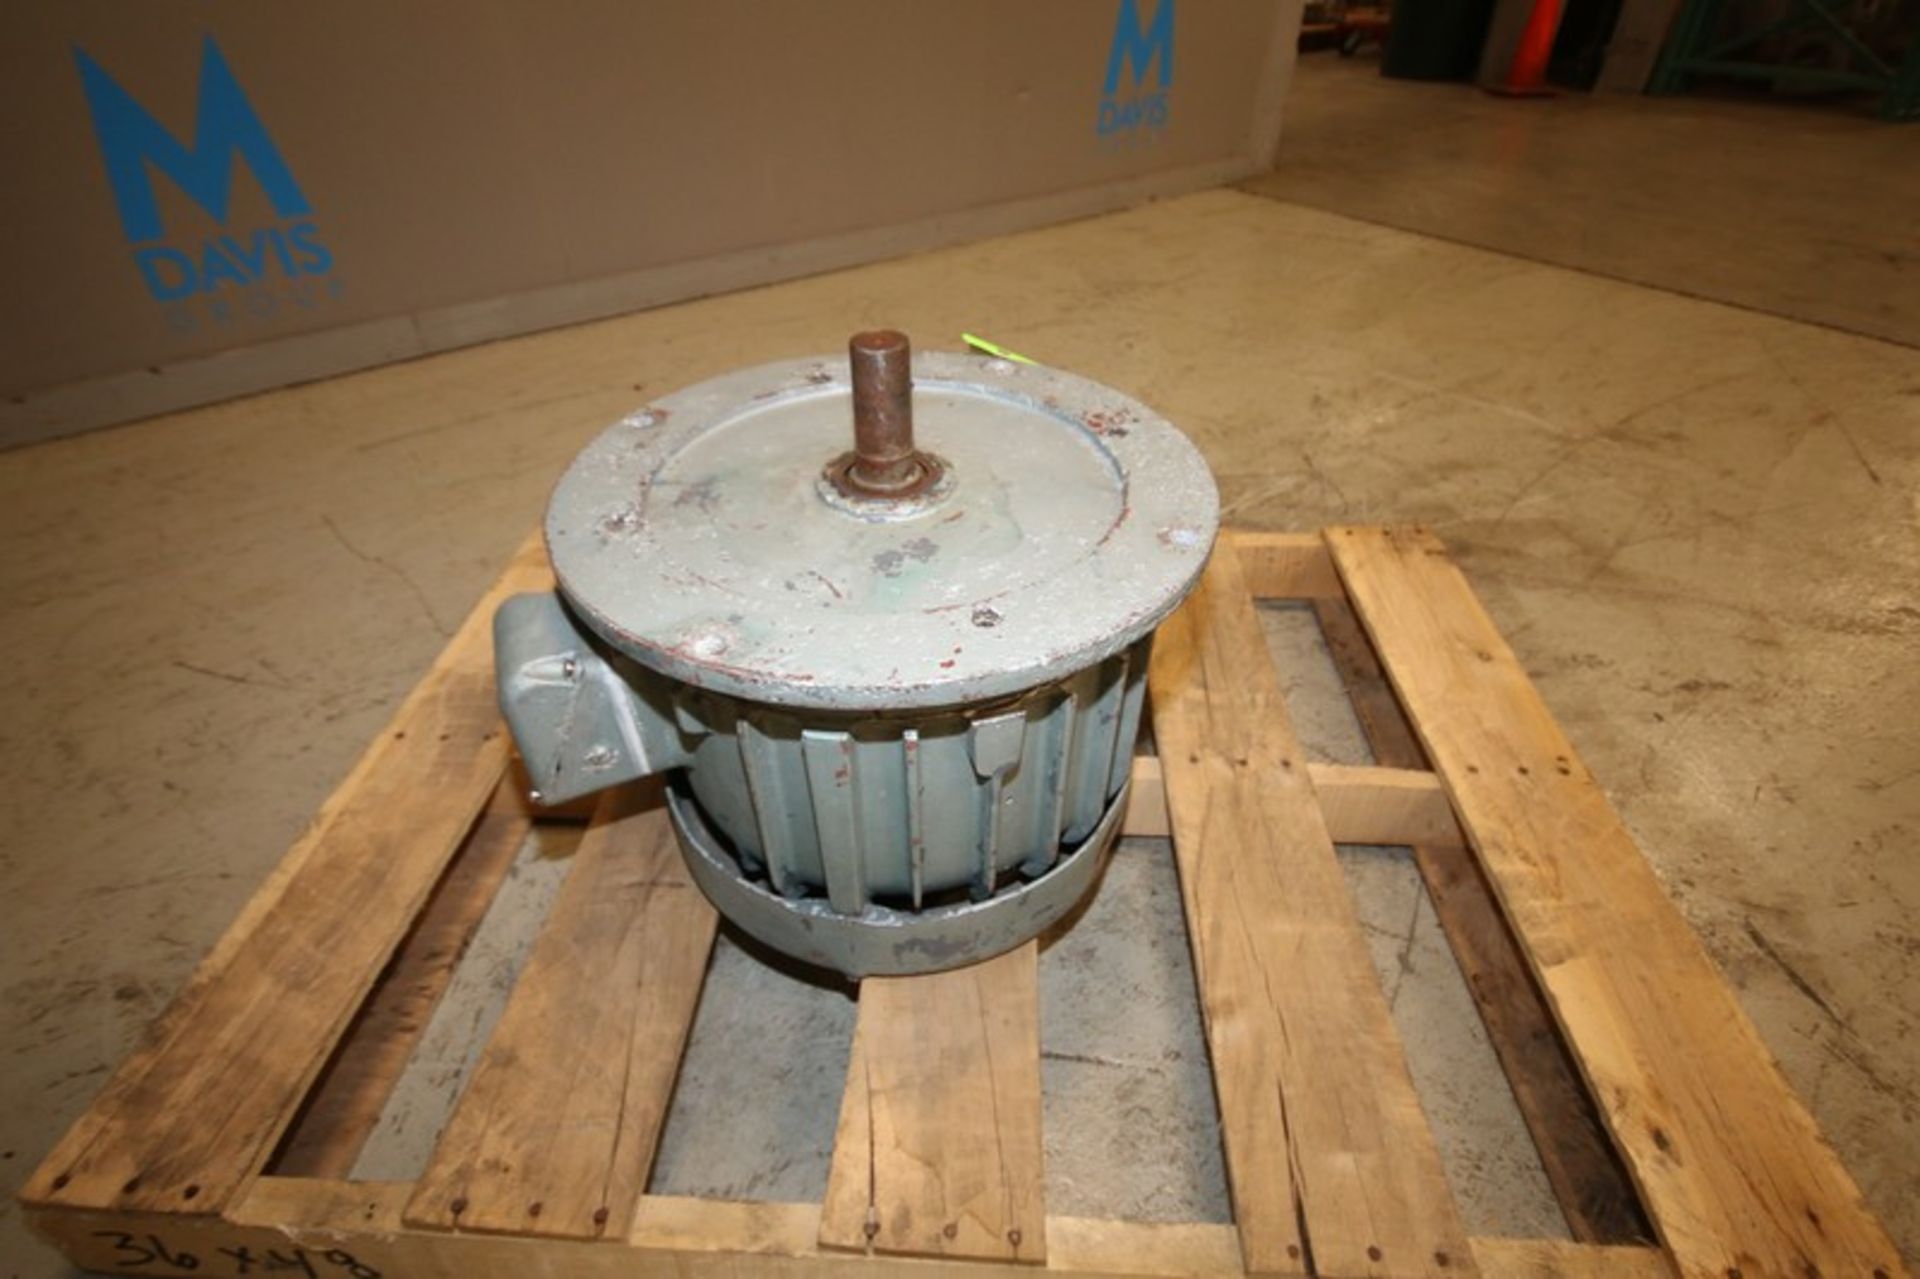 Likwifier / Blender Spare Motor, Aprox. 20 hp, (ID Plate Missing) (INV#96711) (Located @ the MDG - Image 2 of 3